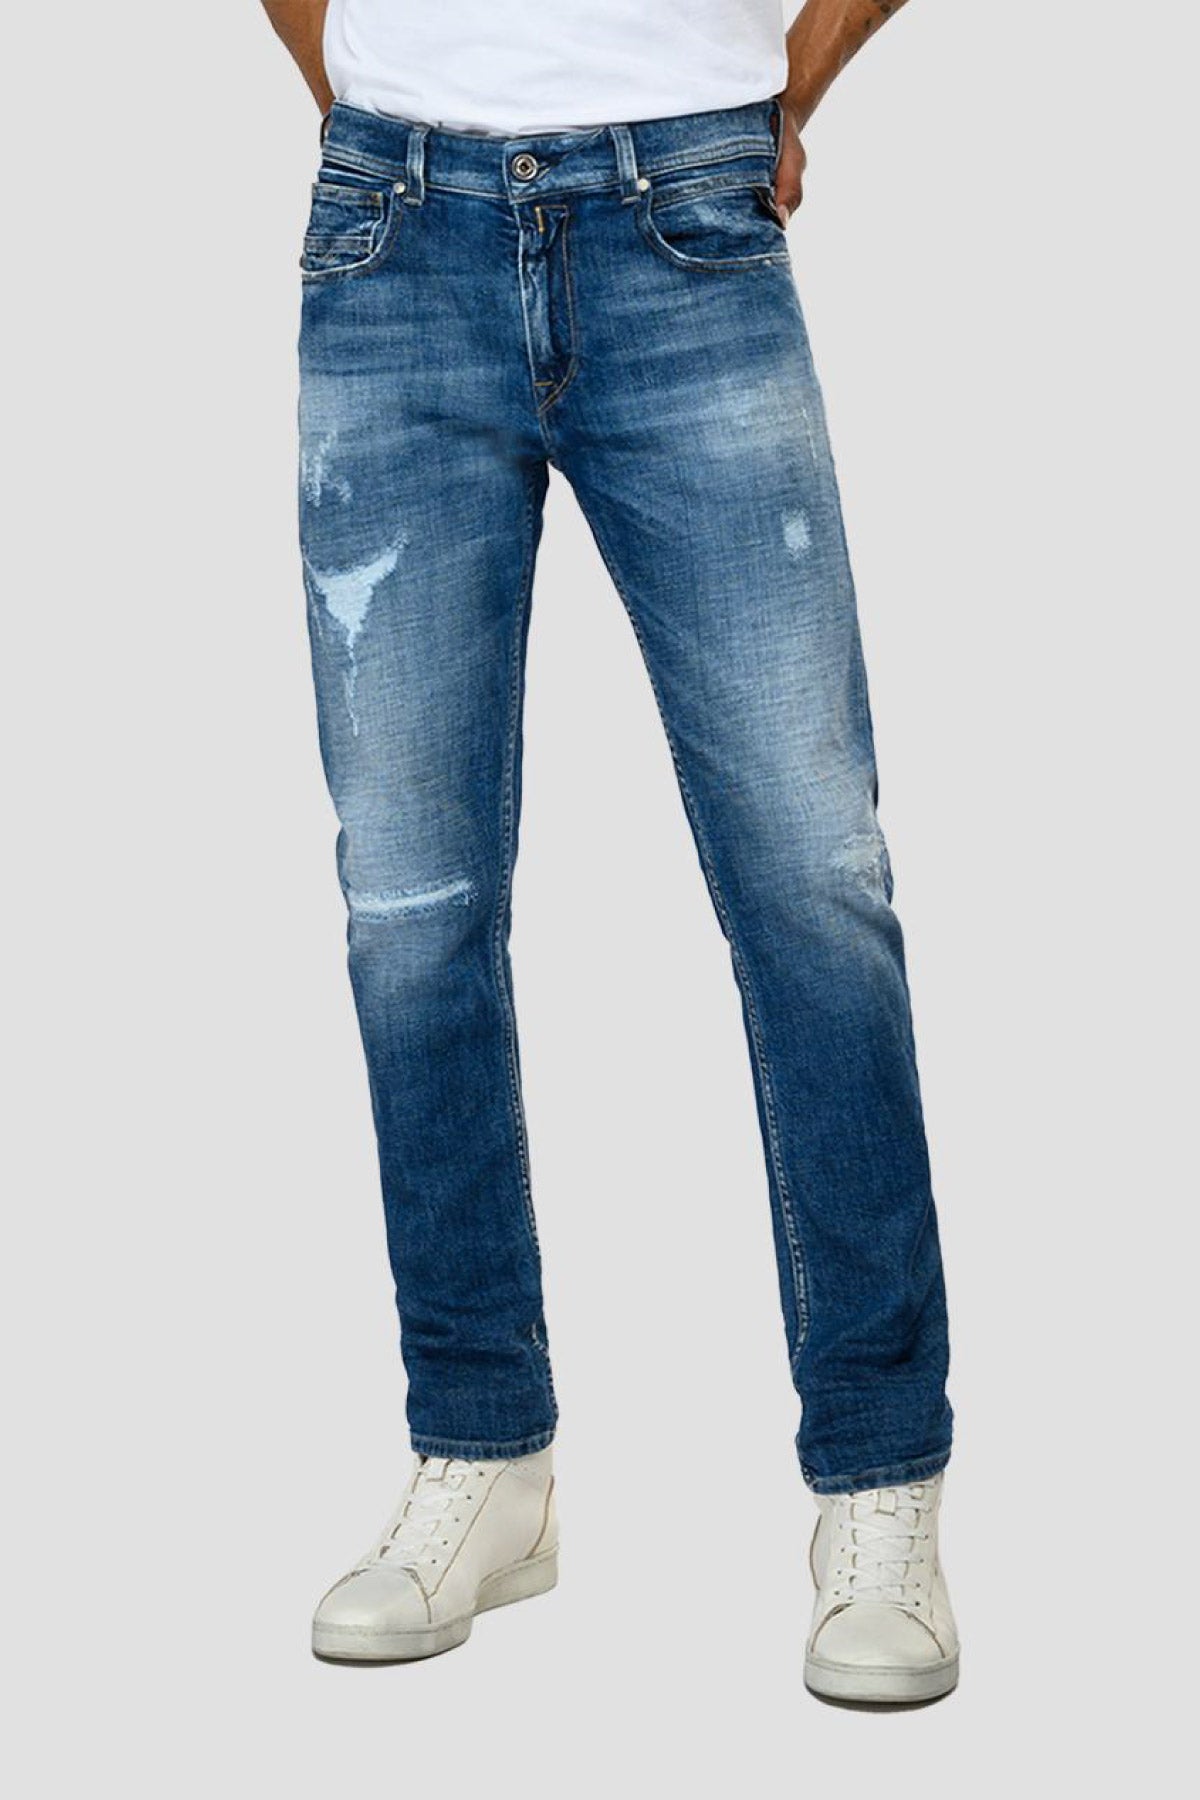 Replay Johnfrus Skinny Fit Jeans-Libas Trendy Fashion Store